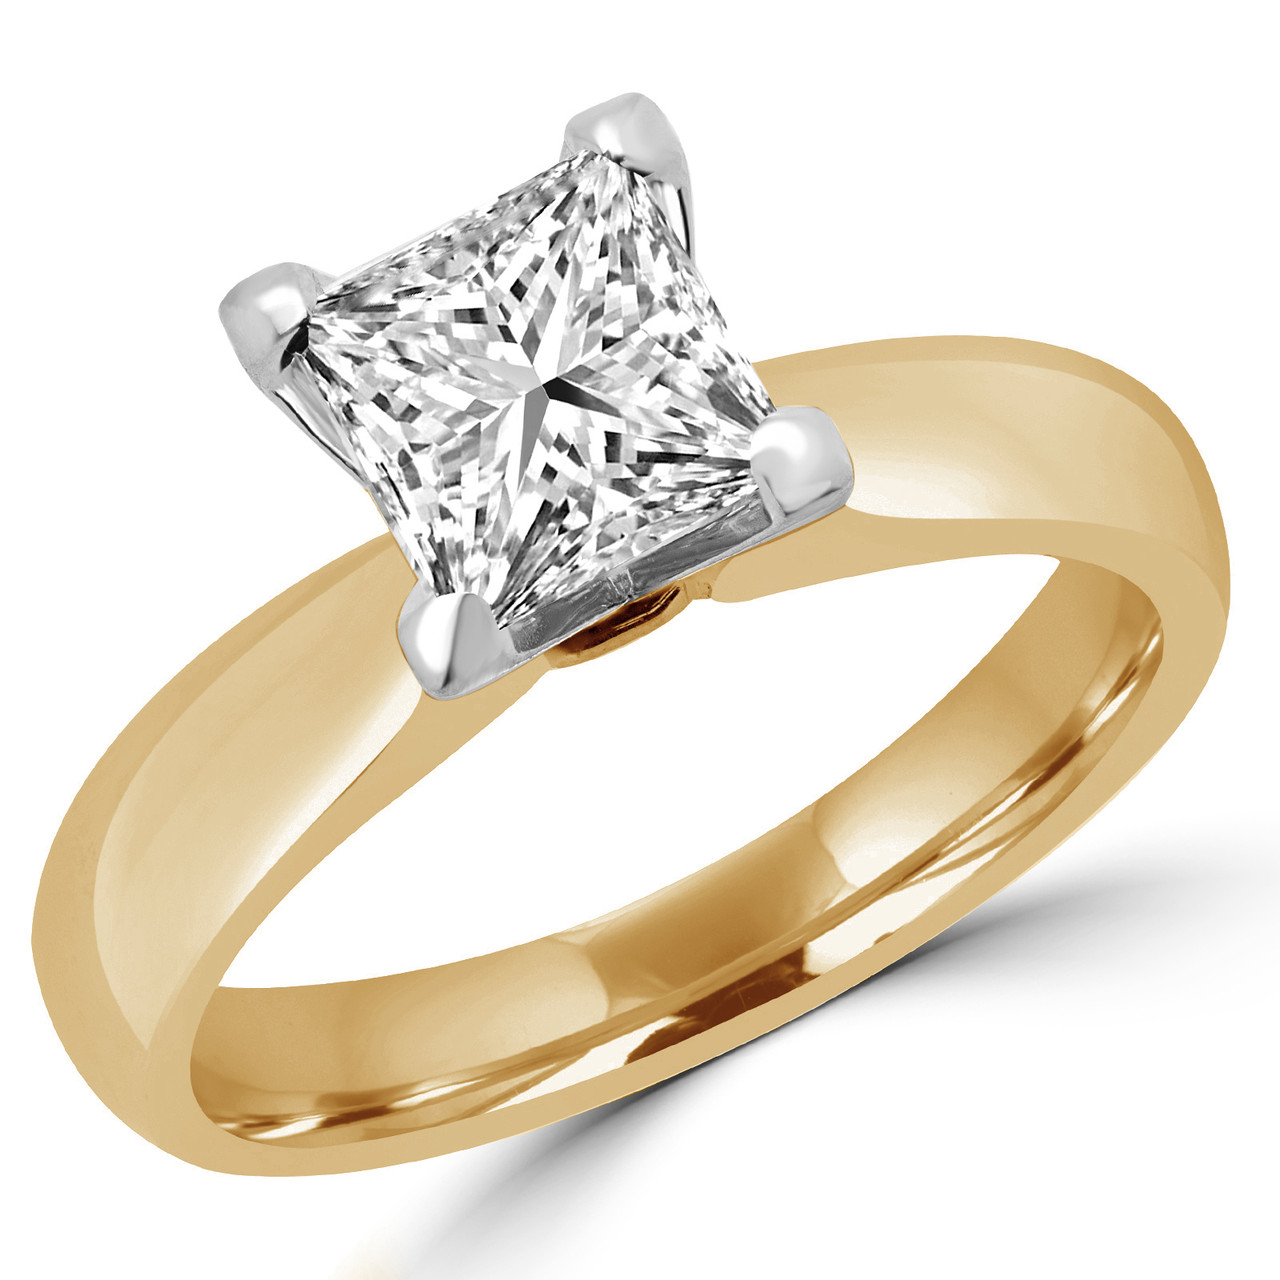  Princess  Cut  Diamond  Solitaire  4 Prong Engagement  Ring  in 